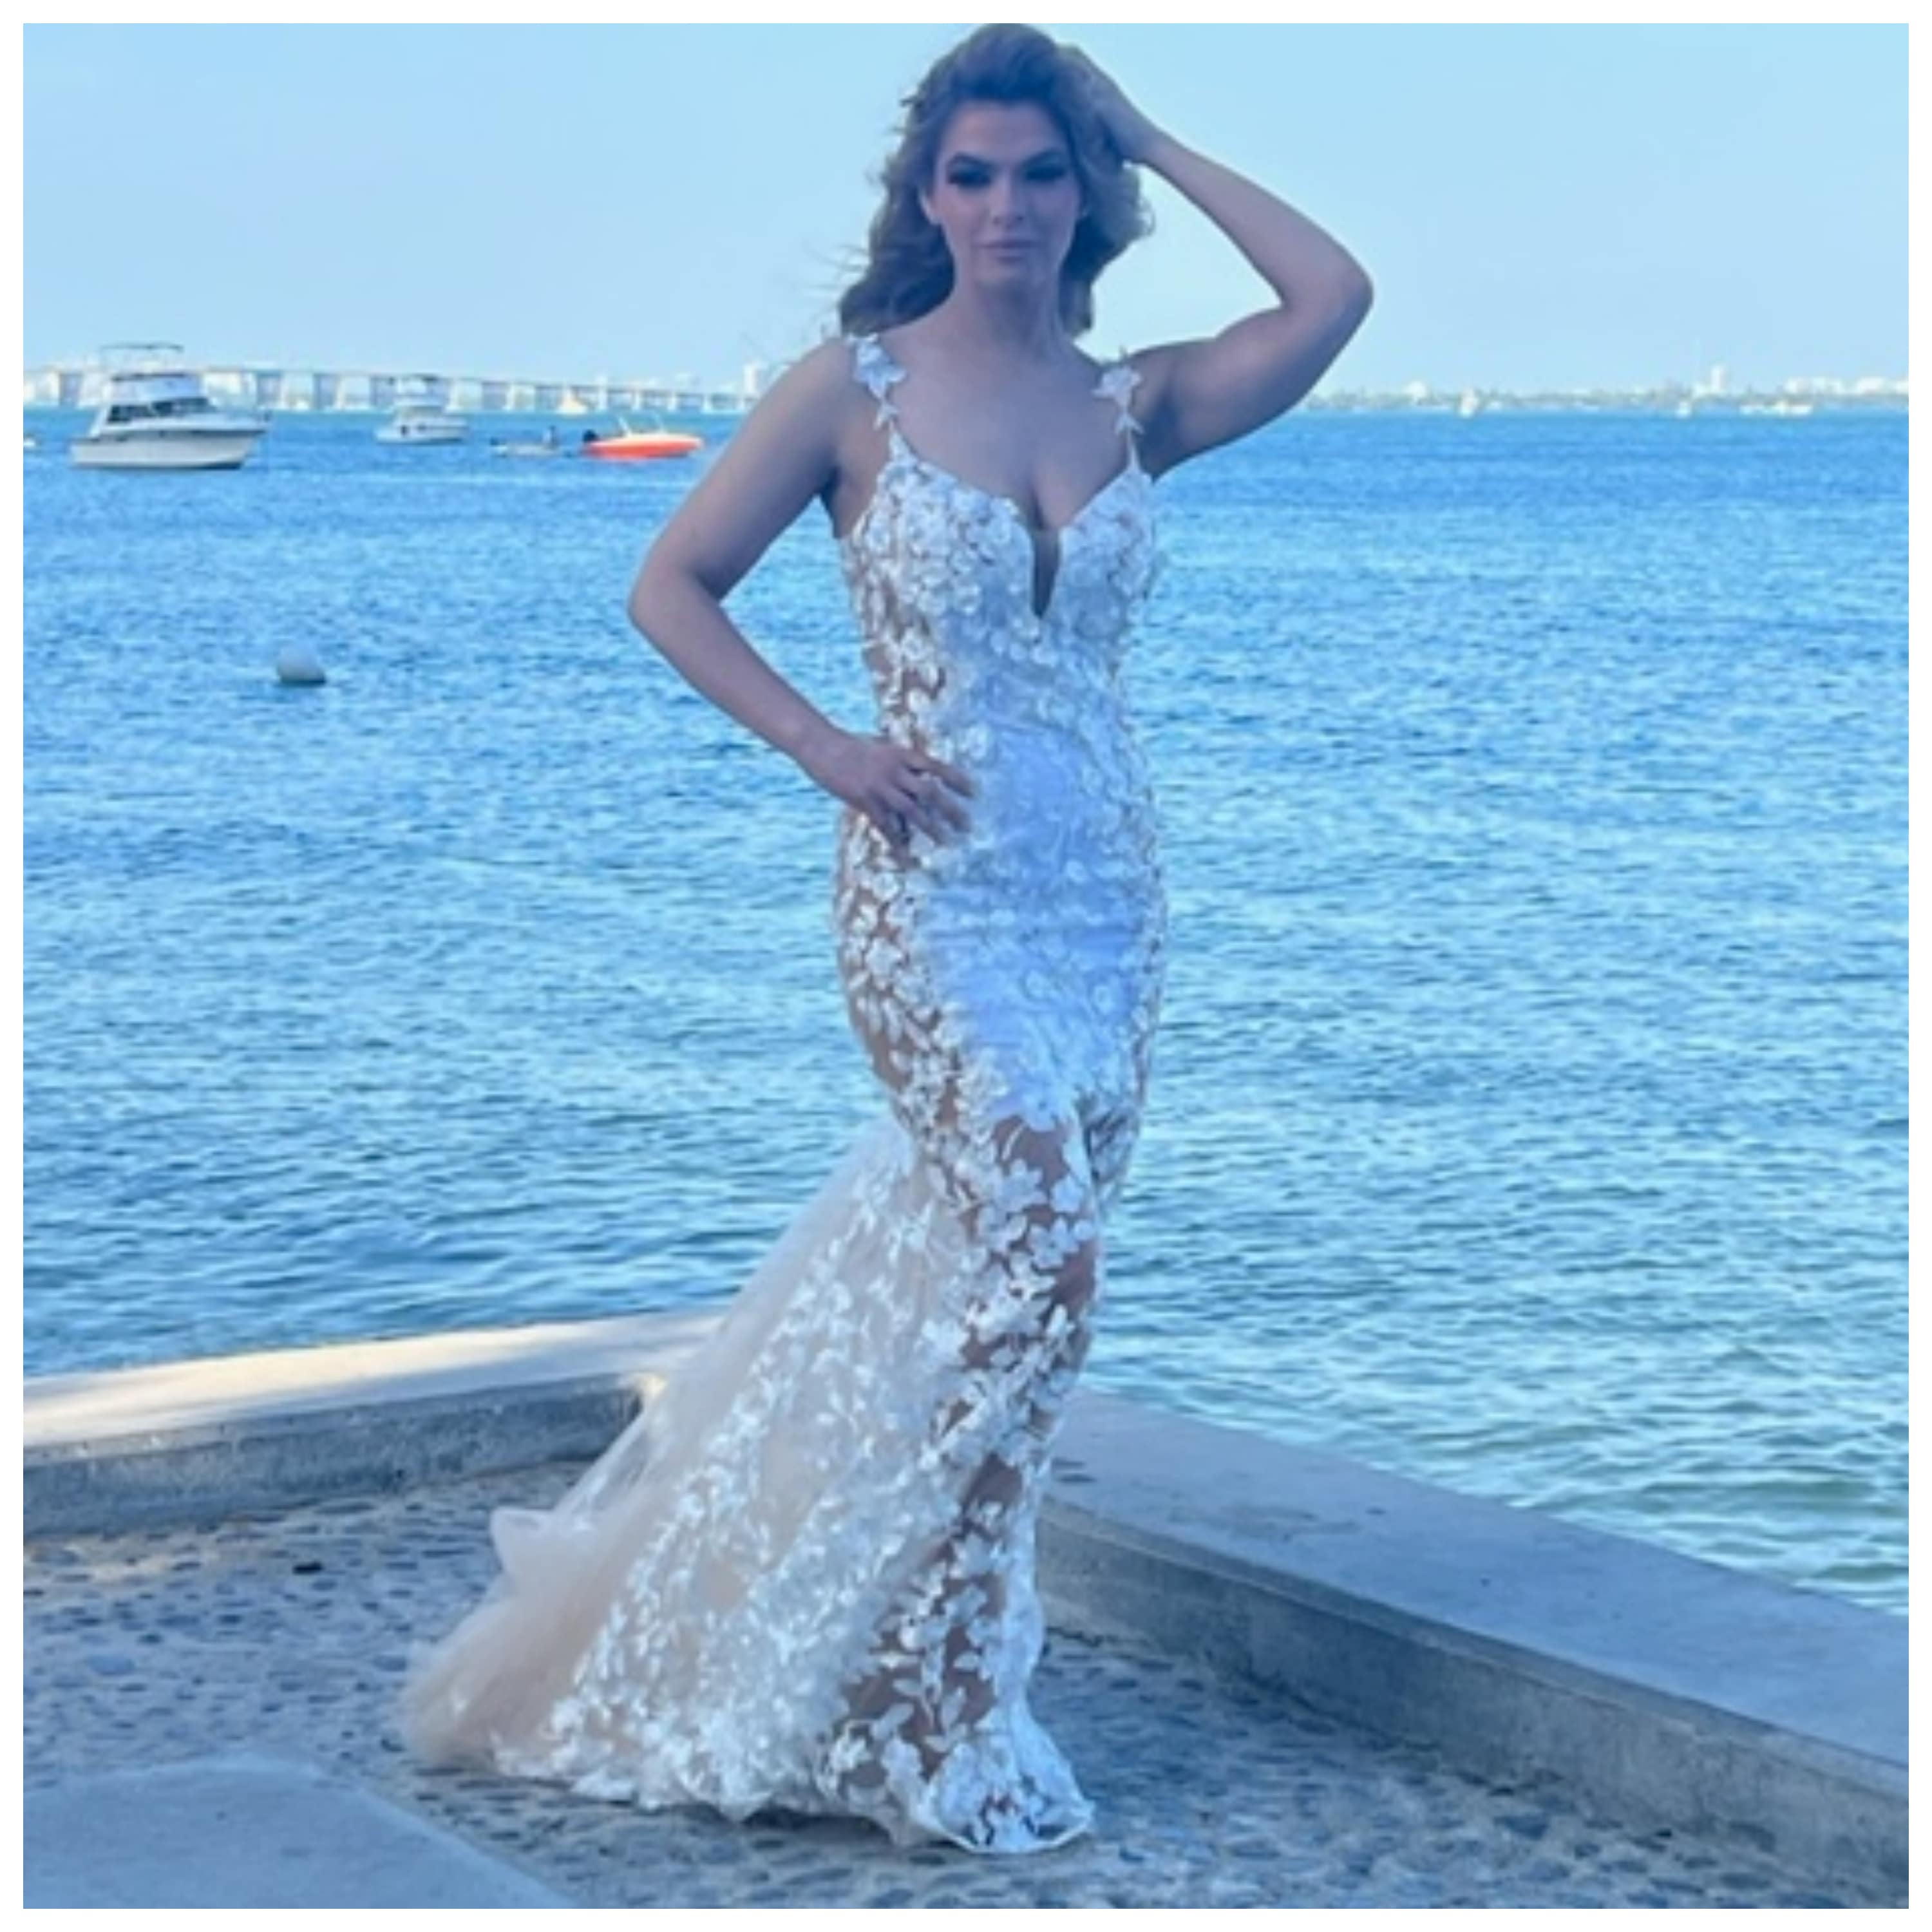 Kasey Cohen from 'Below Deck' models a white gown.